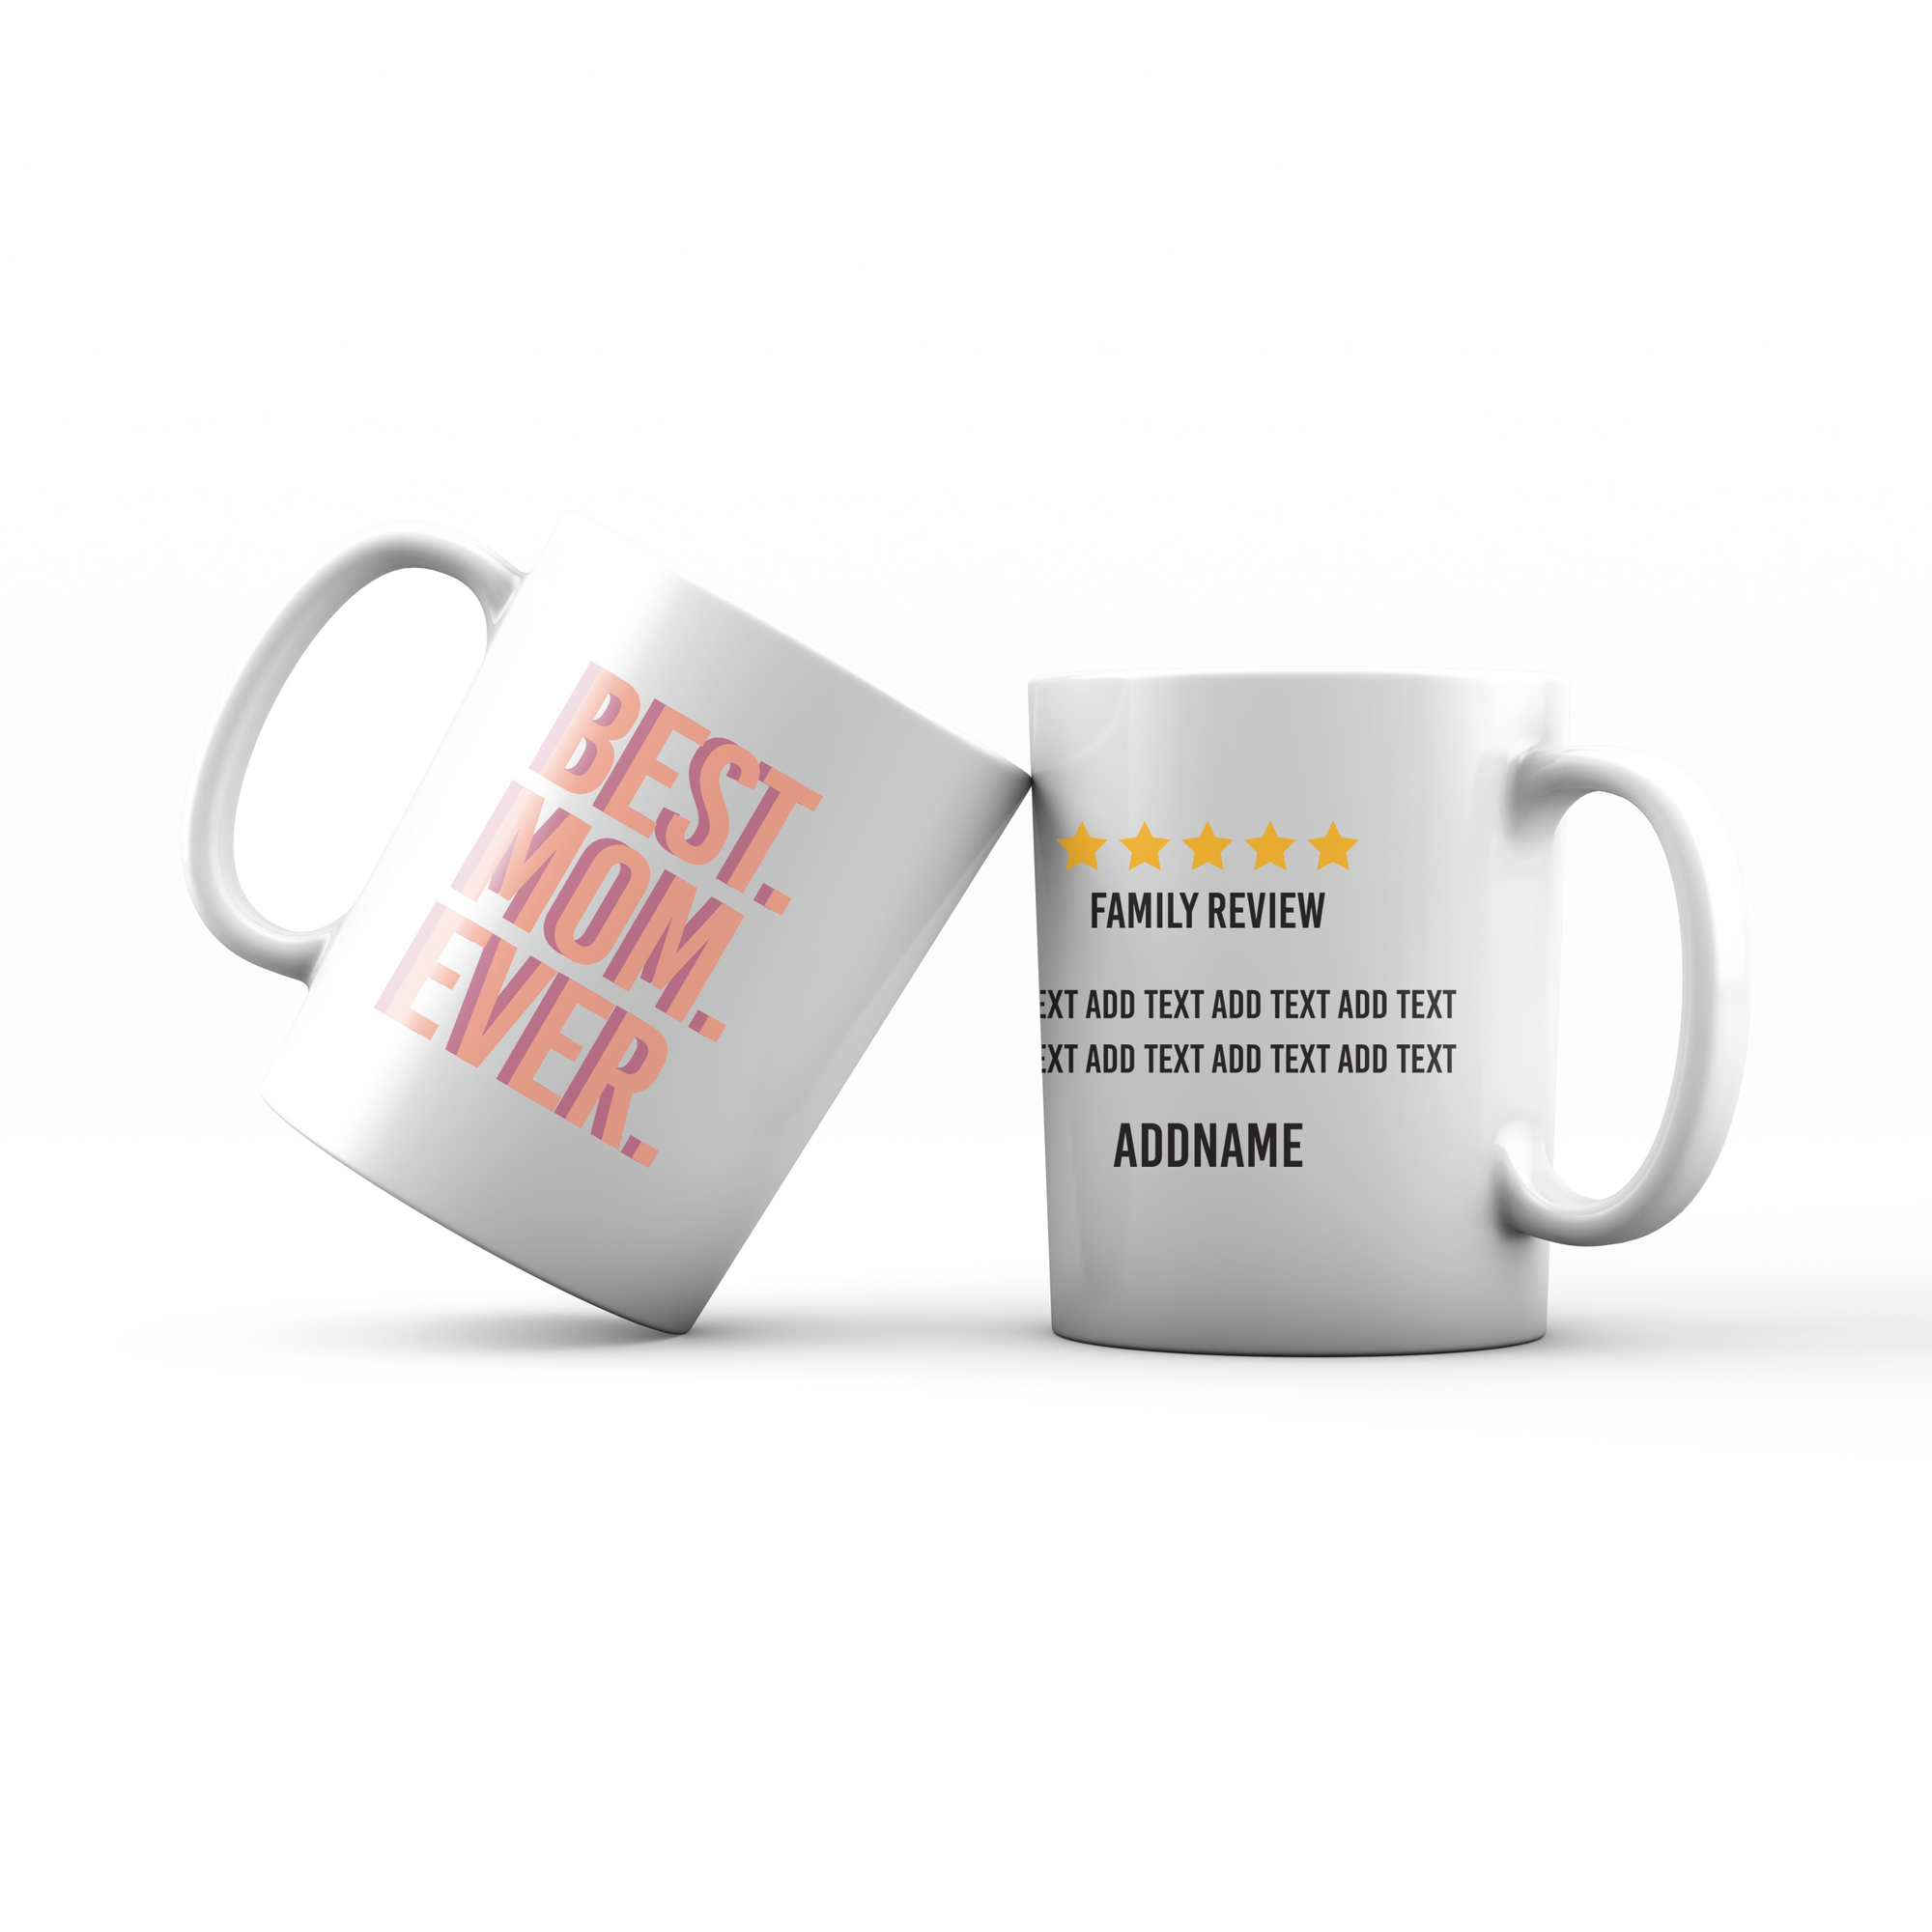 Awesome Mom 1 Best Mom Ever Family Review Add Text And Addname Mug